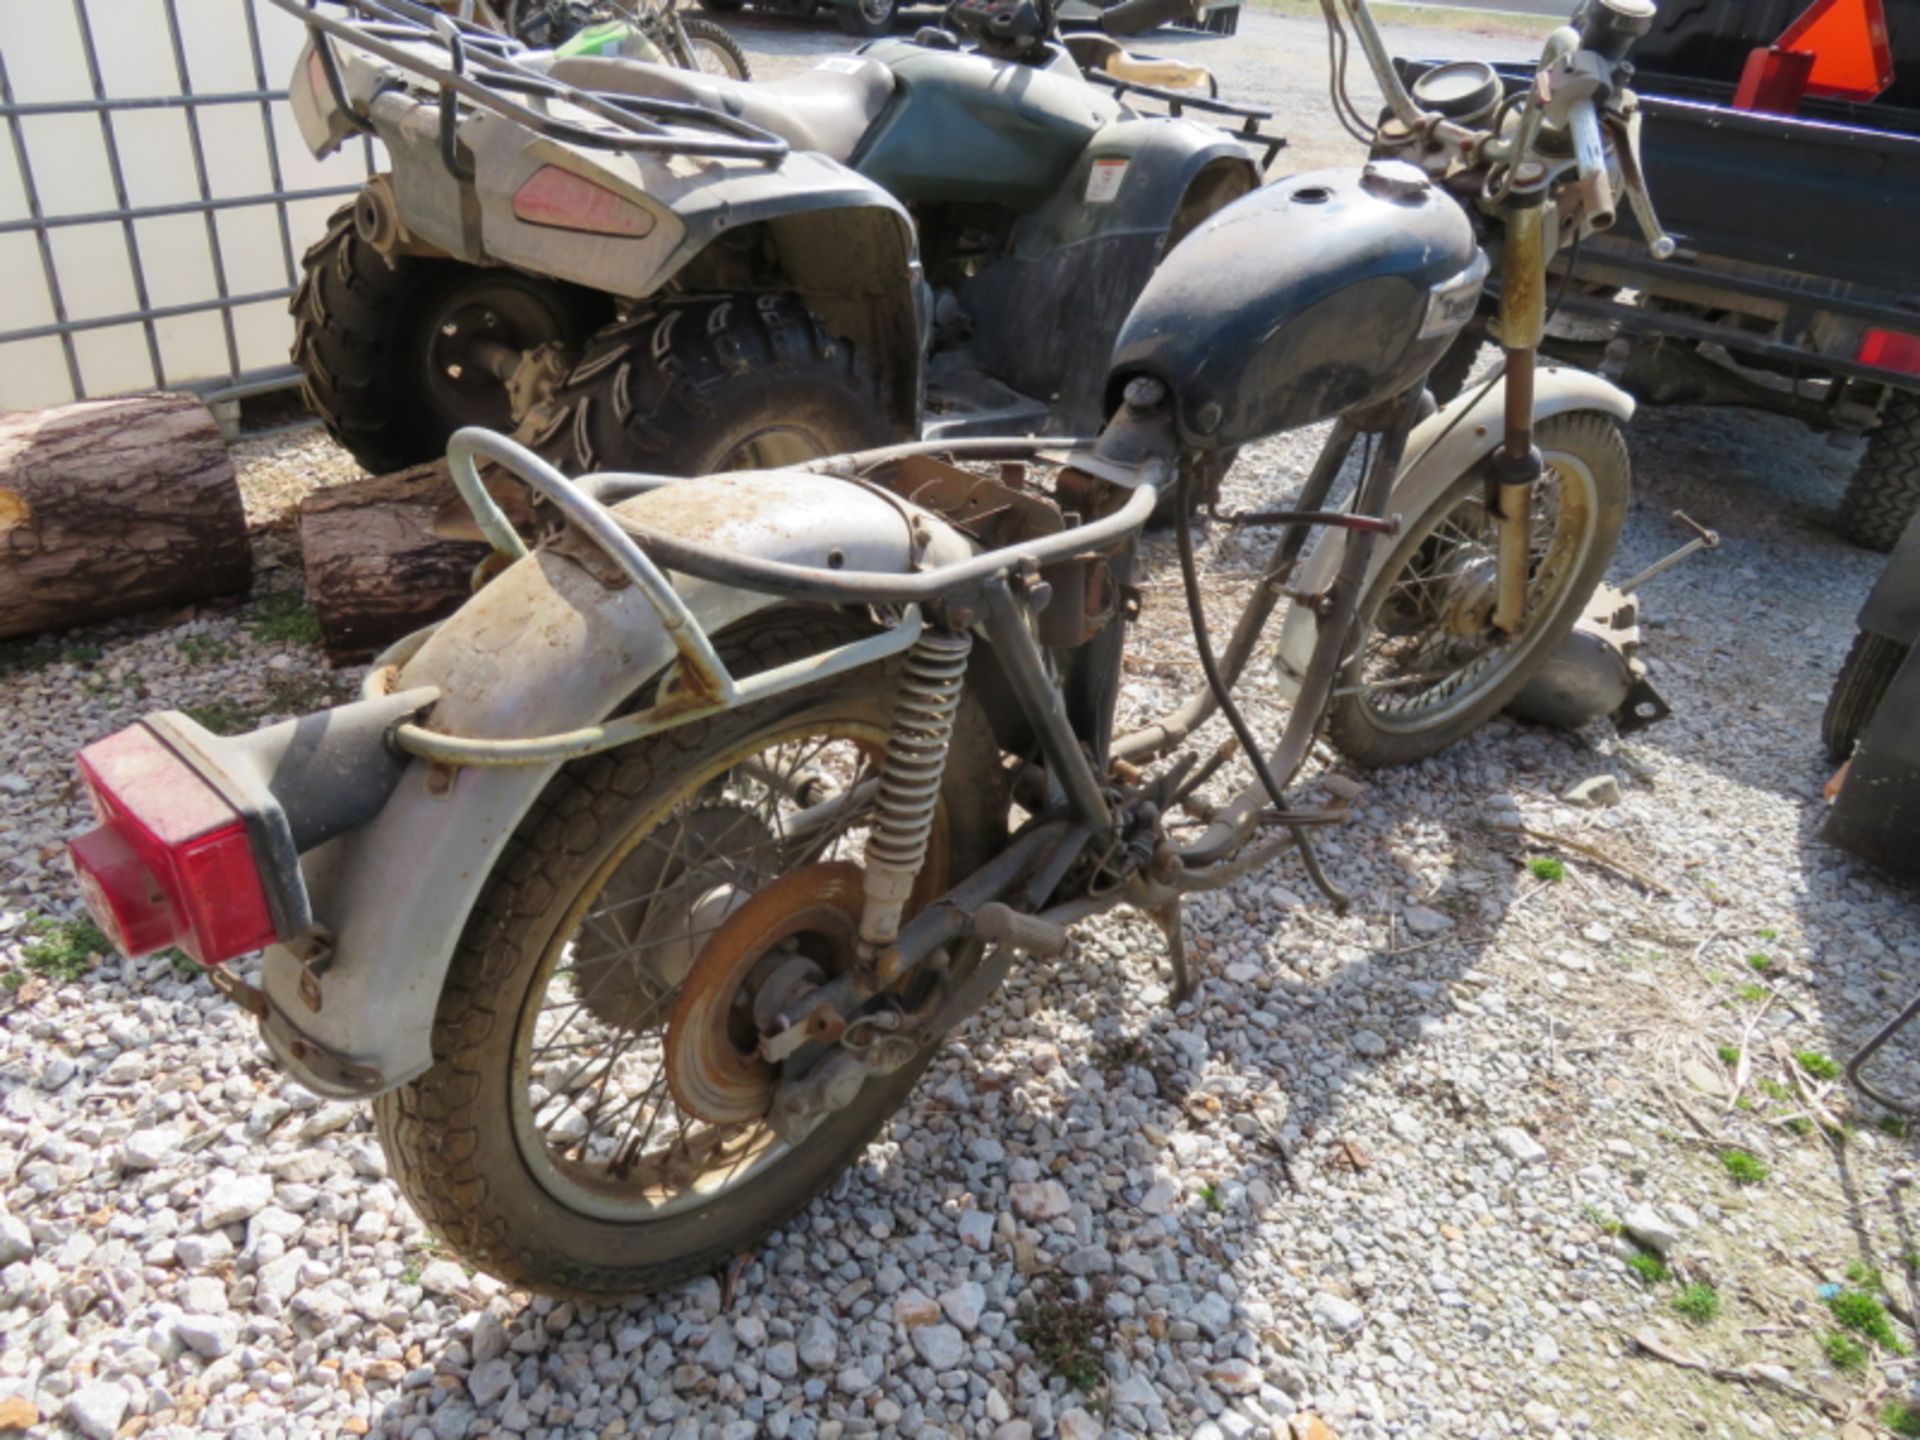 1977 Triumph 750 project bike, has engine and transmission, new valves several years ago, 13k miles - Image 4 of 5